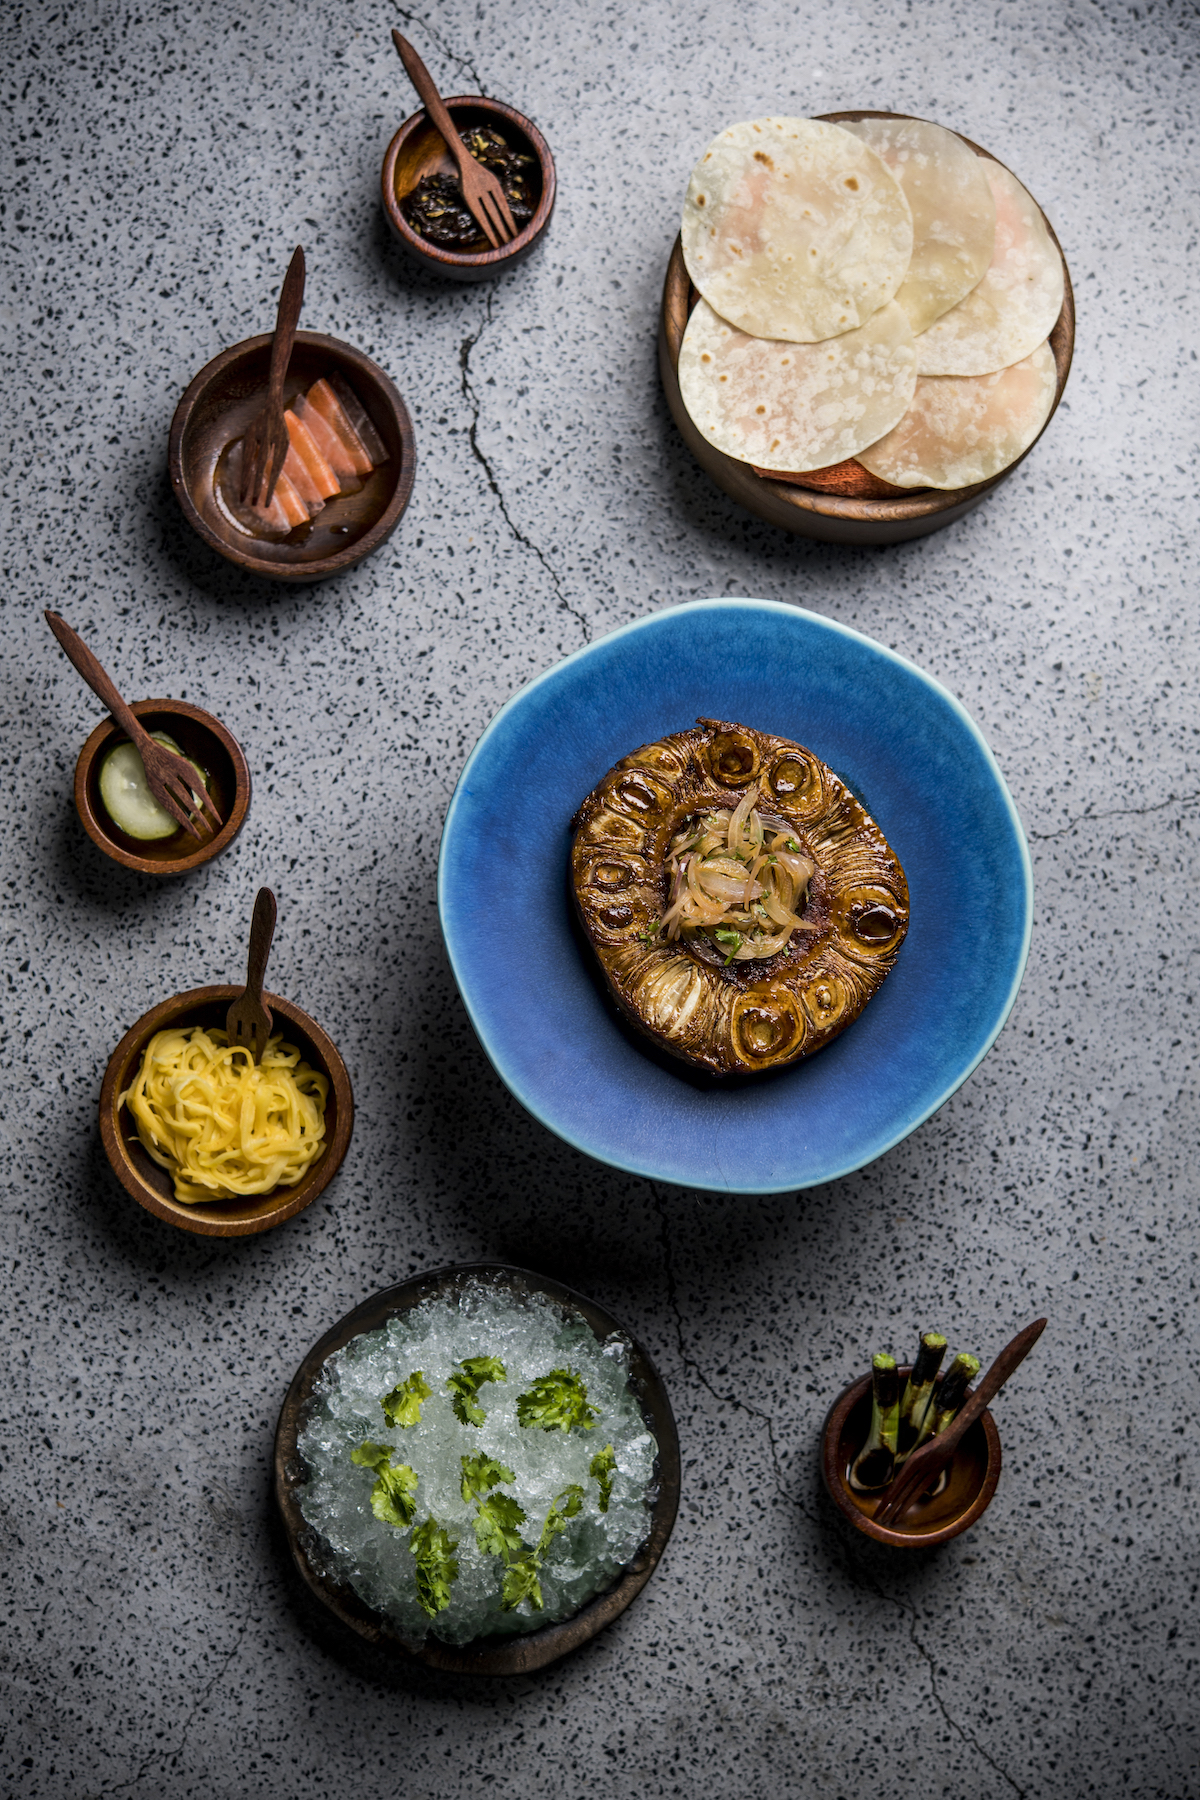 Unripe jackfruit with roti and pickles from Gaa